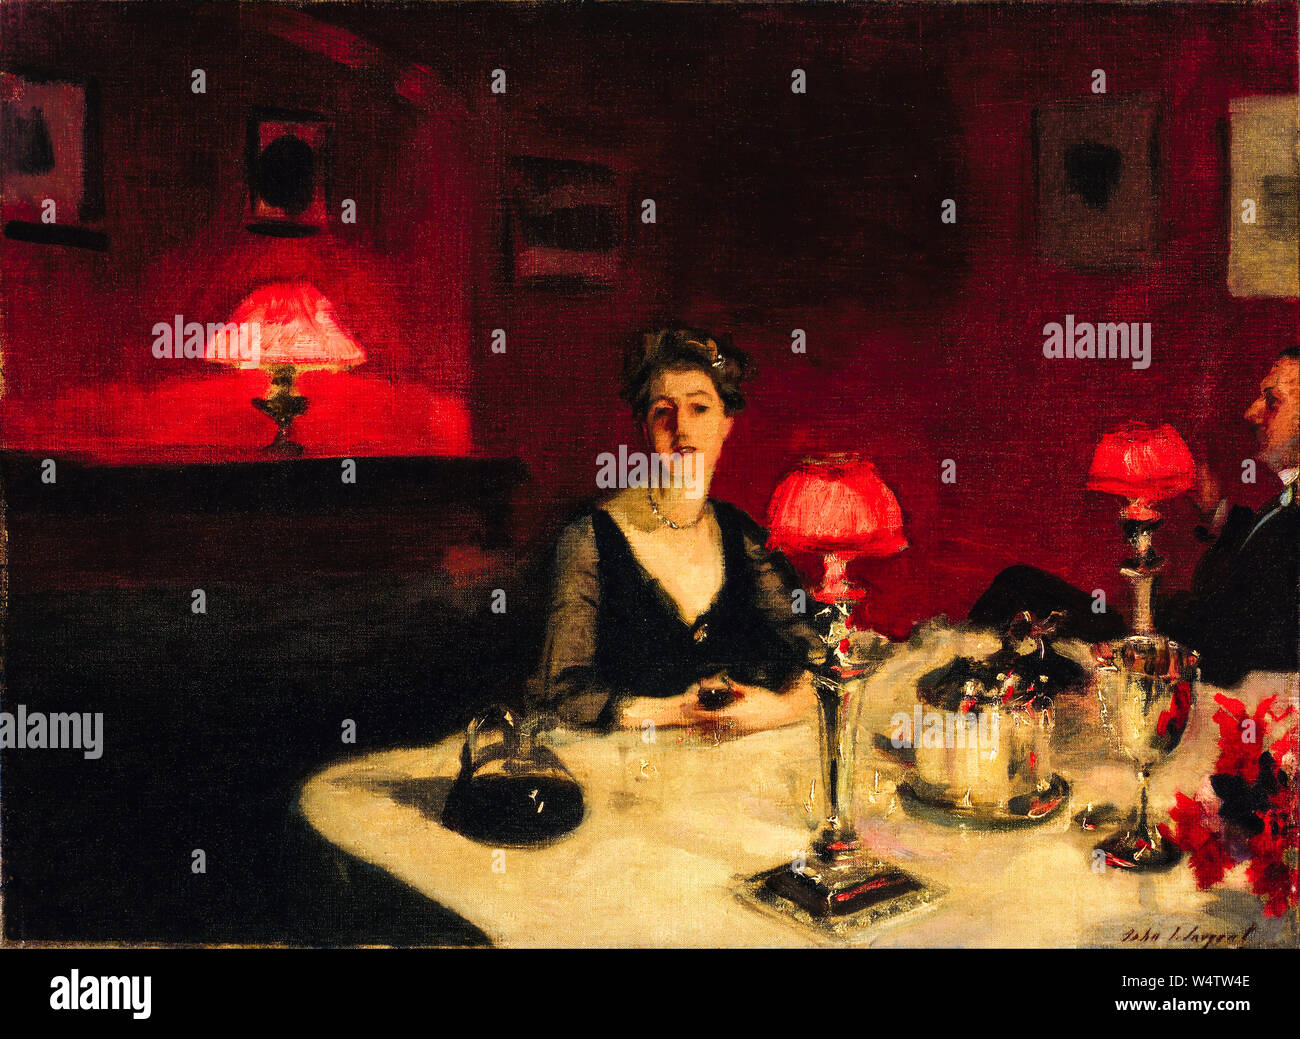 John Singer Sargent, painting, A Dinner Table at Night, 1884 Stock Photo